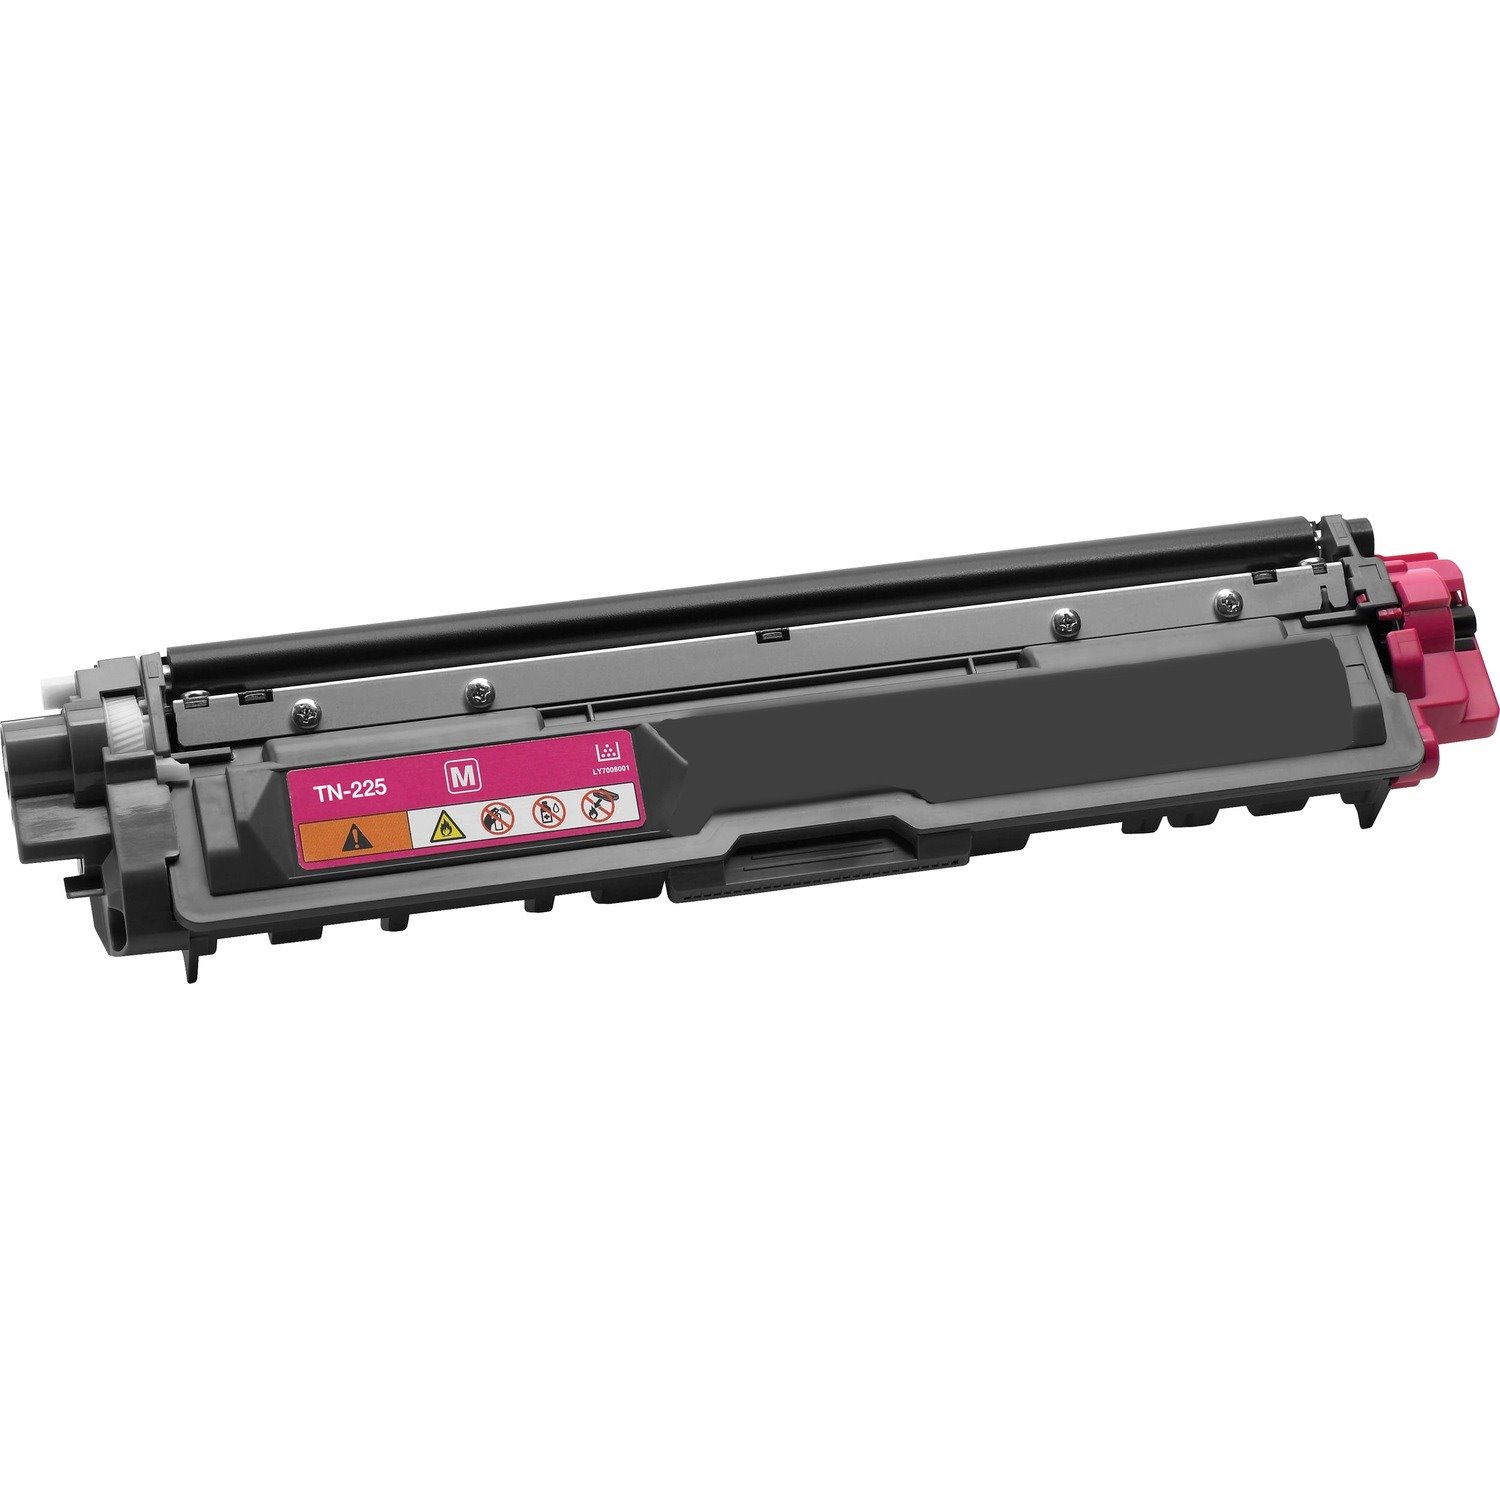 eReplacements New Compatible Toner Replaces Brother TN225M